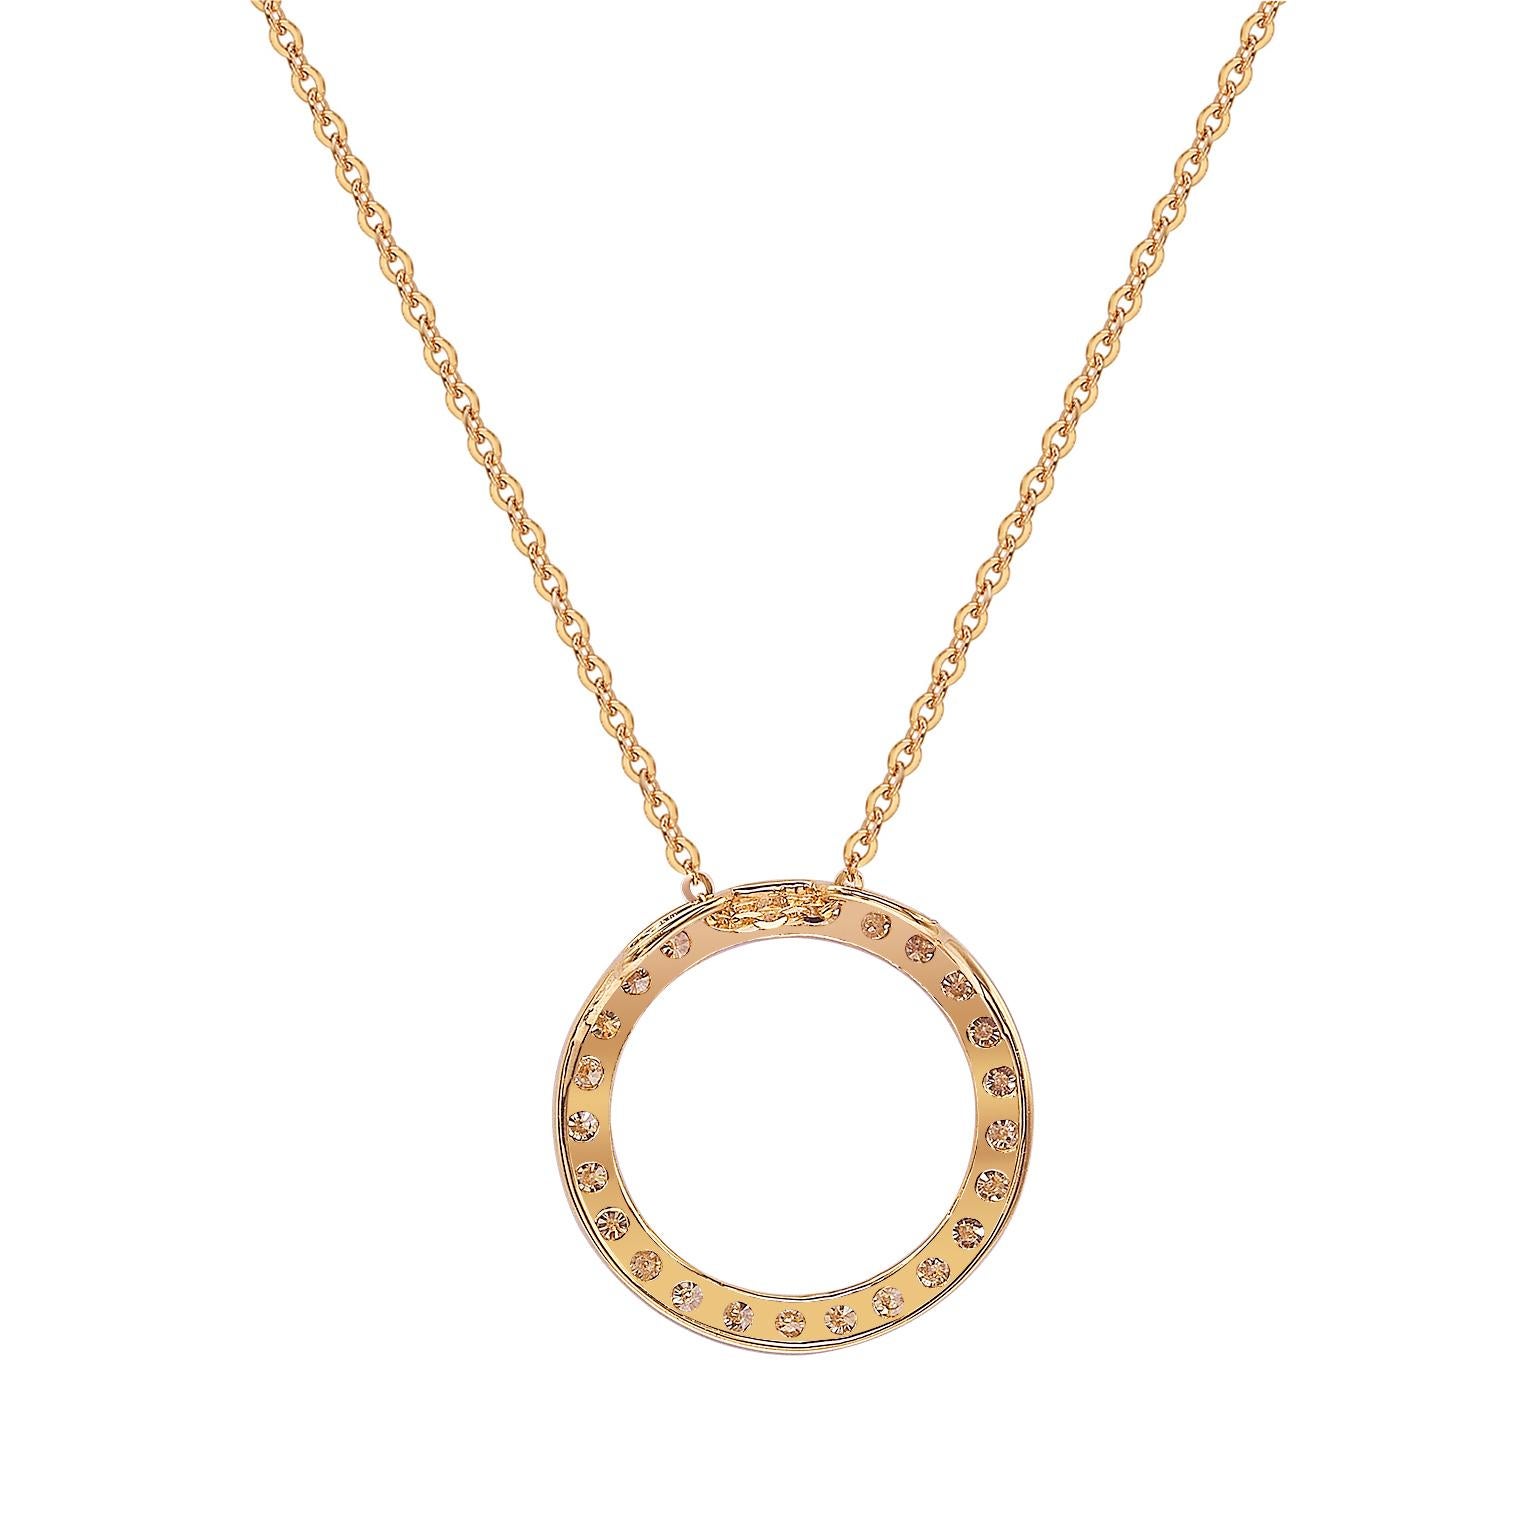 An open circle pendant displays round-cut diamonds on 14 karat rose gold setting, on this stunning necklace. This beautiful circle pendant contains 25 white round cut diamonds totaling .50 cttw. The necklace is 18 mm in size, perfect to wear alone